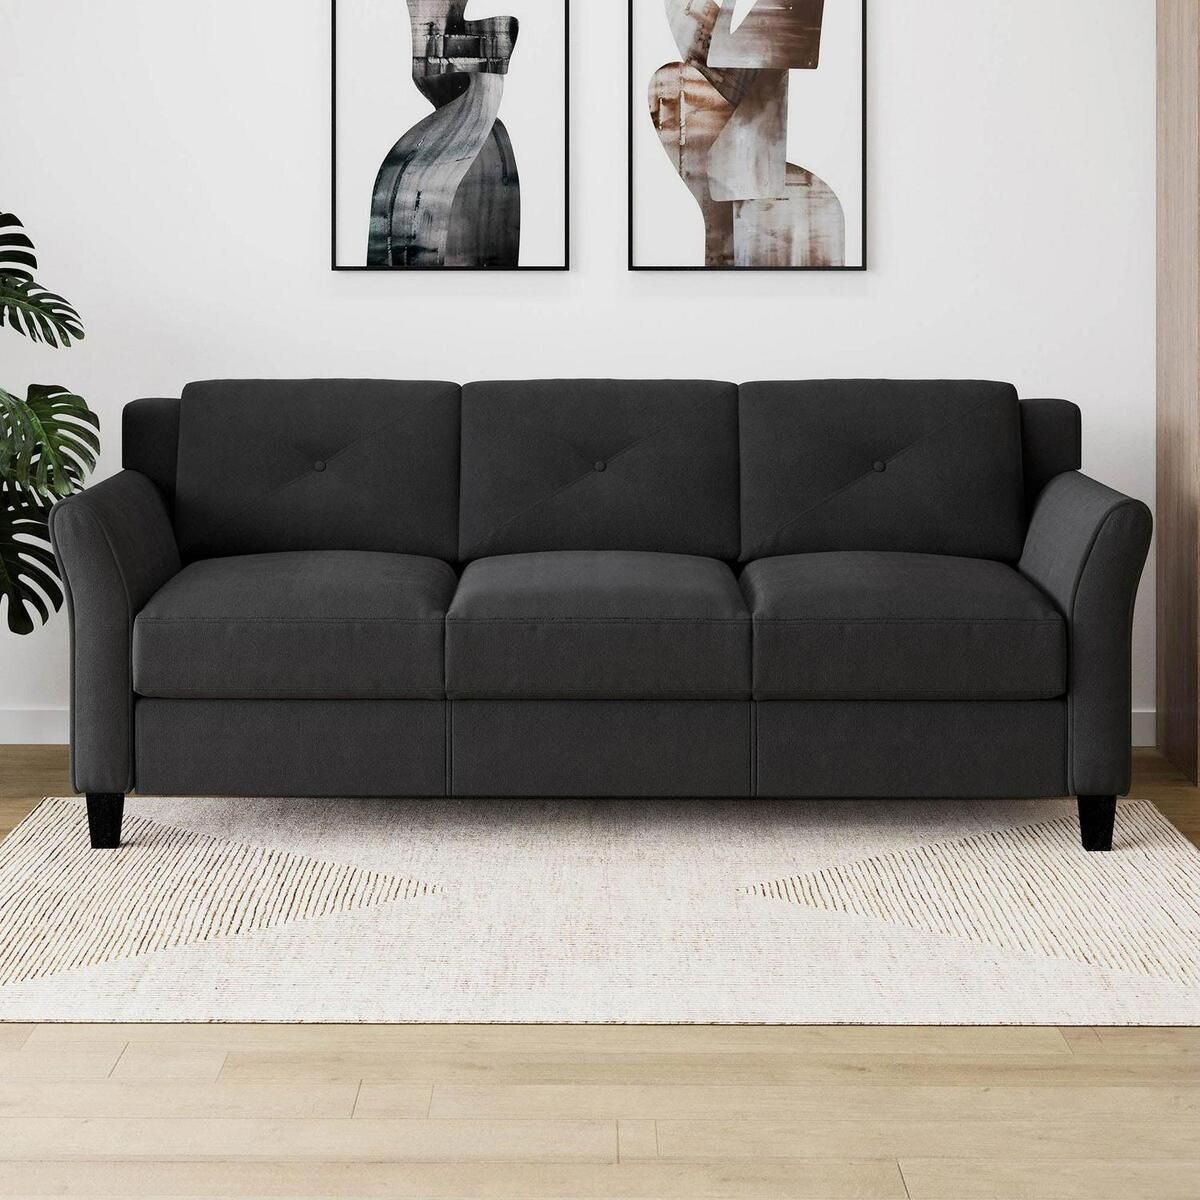 Traditional Sofa Curved Rolled Arms Comfortable Taryn Black Fabric | Ebay Intended For Traditional Black Fabric Sofas (Photo 1 of 15)